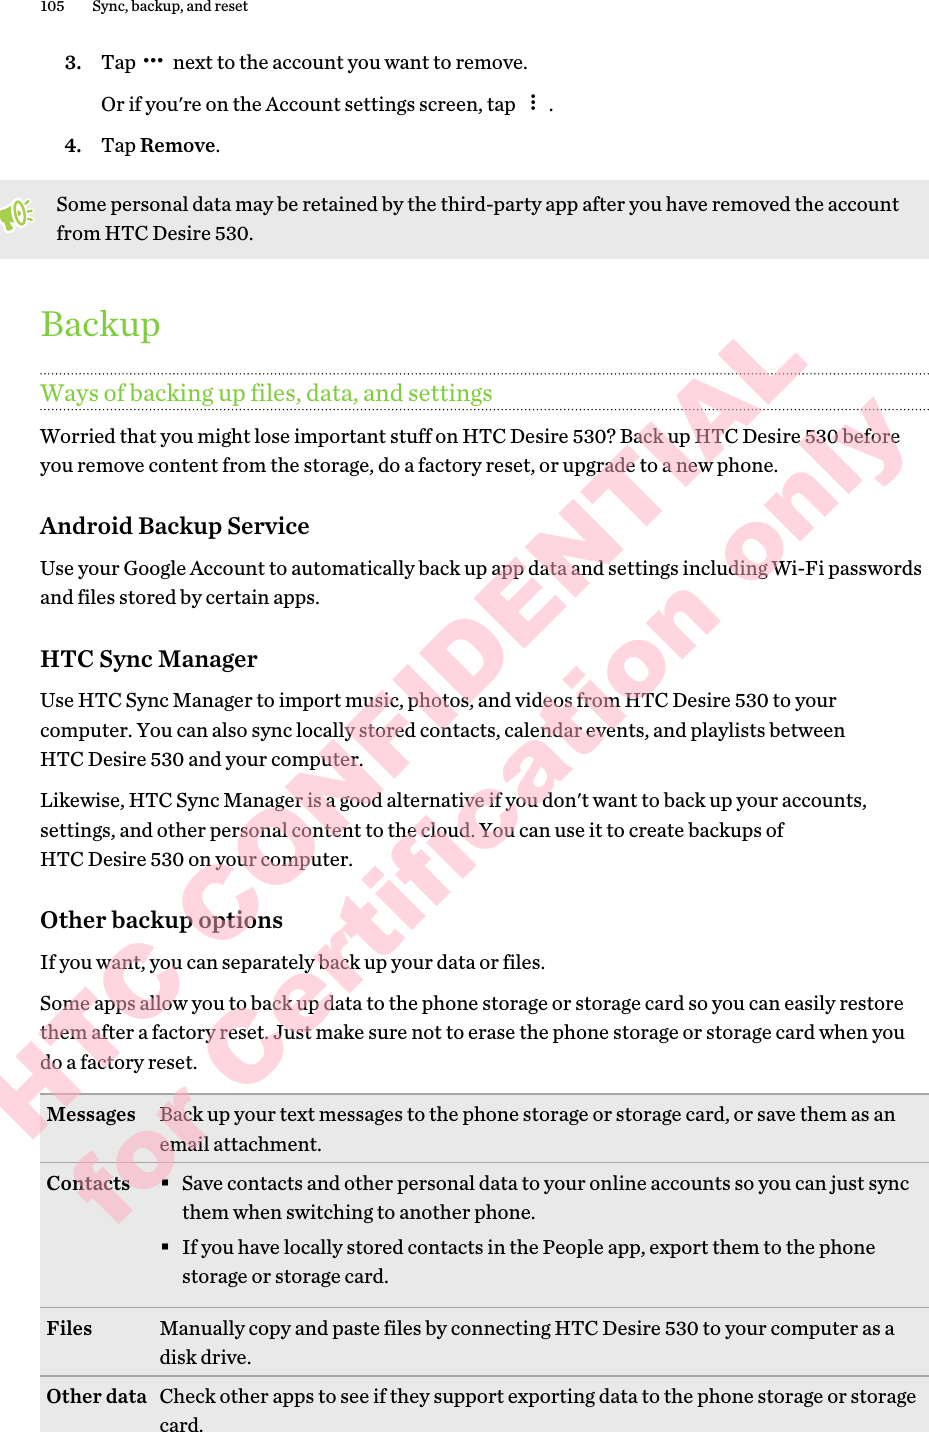 3. Tap   next to the account you want to remove. Or if you&apos;re on the Account settings screen, tap  .4. Tap Remove.Some personal data may be retained by the third-party app after you have removed the account from HTC Desire 530.BackupWays of backing up files, data, and settingsWorried that you might lose important stuff on HTC Desire 530? Back up HTC Desire 530 before you remove content from the storage, do a factory reset, or upgrade to a new phone. Android Backup ServiceUse your Google Account to automatically back up app data and settings including Wi-Fi passwords and files stored by certain apps.HTC Sync ManagerUse HTC Sync Manager to import music, photos, and videos from HTC Desire 530 to your computer. You can also sync locally stored contacts, calendar events, and playlists between HTC Desire 530 and your computer.Likewise, HTC Sync Manager is a good alternative if you don&apos;t want to back up your accounts, settings, and other personal content to the cloud. You can use it to create backups of HTC Desire 530 on your computer.Other backup optionsIf you want, you can separately back up your data or files.Some apps allow you to back up data to the phone storage or storage card so you can easily restore them after a factory reset. Just make sure not to erase the phone storage or storage card when you do a factory reset.Messages Back up your text messages to the phone storage or storage card, or save them as an email attachment. Contacts §Save contacts and other personal data to your online accounts so you can just sync them when switching to another phone.§If you have locally stored contacts in the People app, export them to the phone storage or storage card.Files Manually copy and paste files by connecting HTC Desire 530 to your computer as a disk drive.Other data Check other apps to see if they support exporting data to the phone storage or storage card.105 Sync, backup, and resetHTC CONFIDENTIAL for Certification only